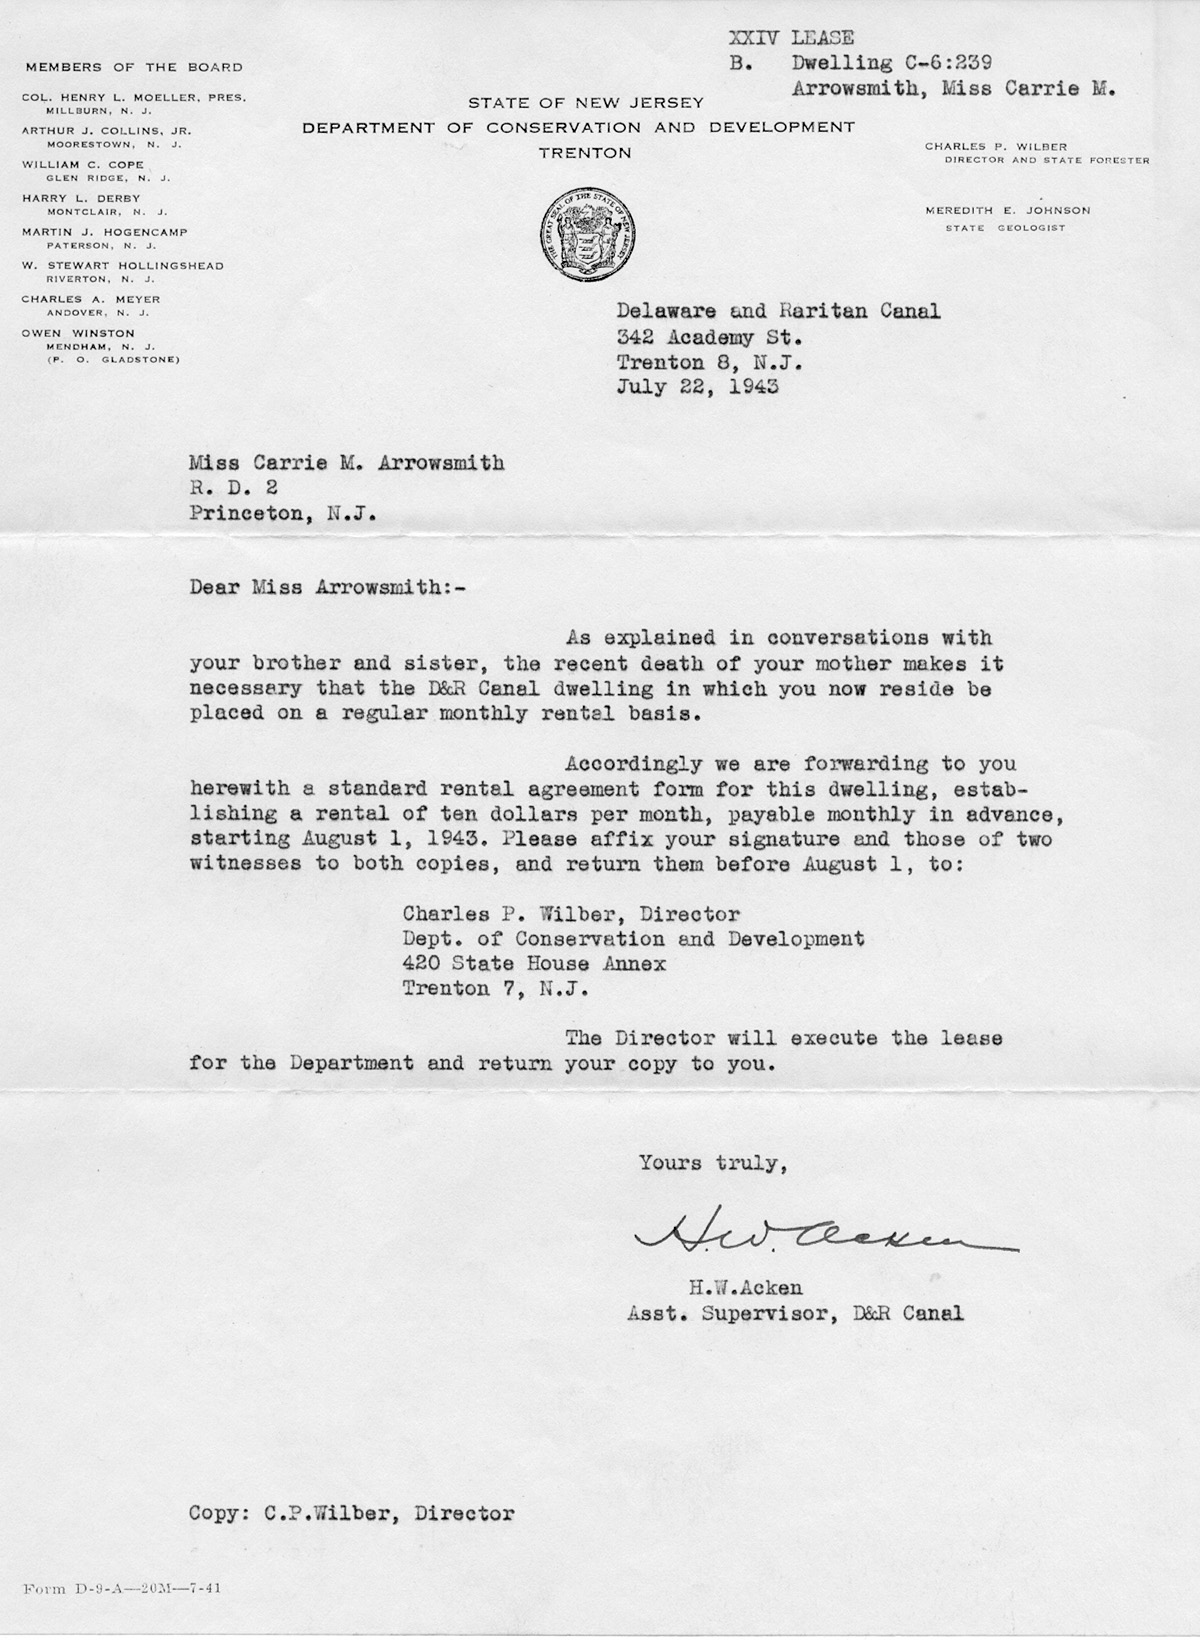 Letter To Carrie Arrowsmith; 1965